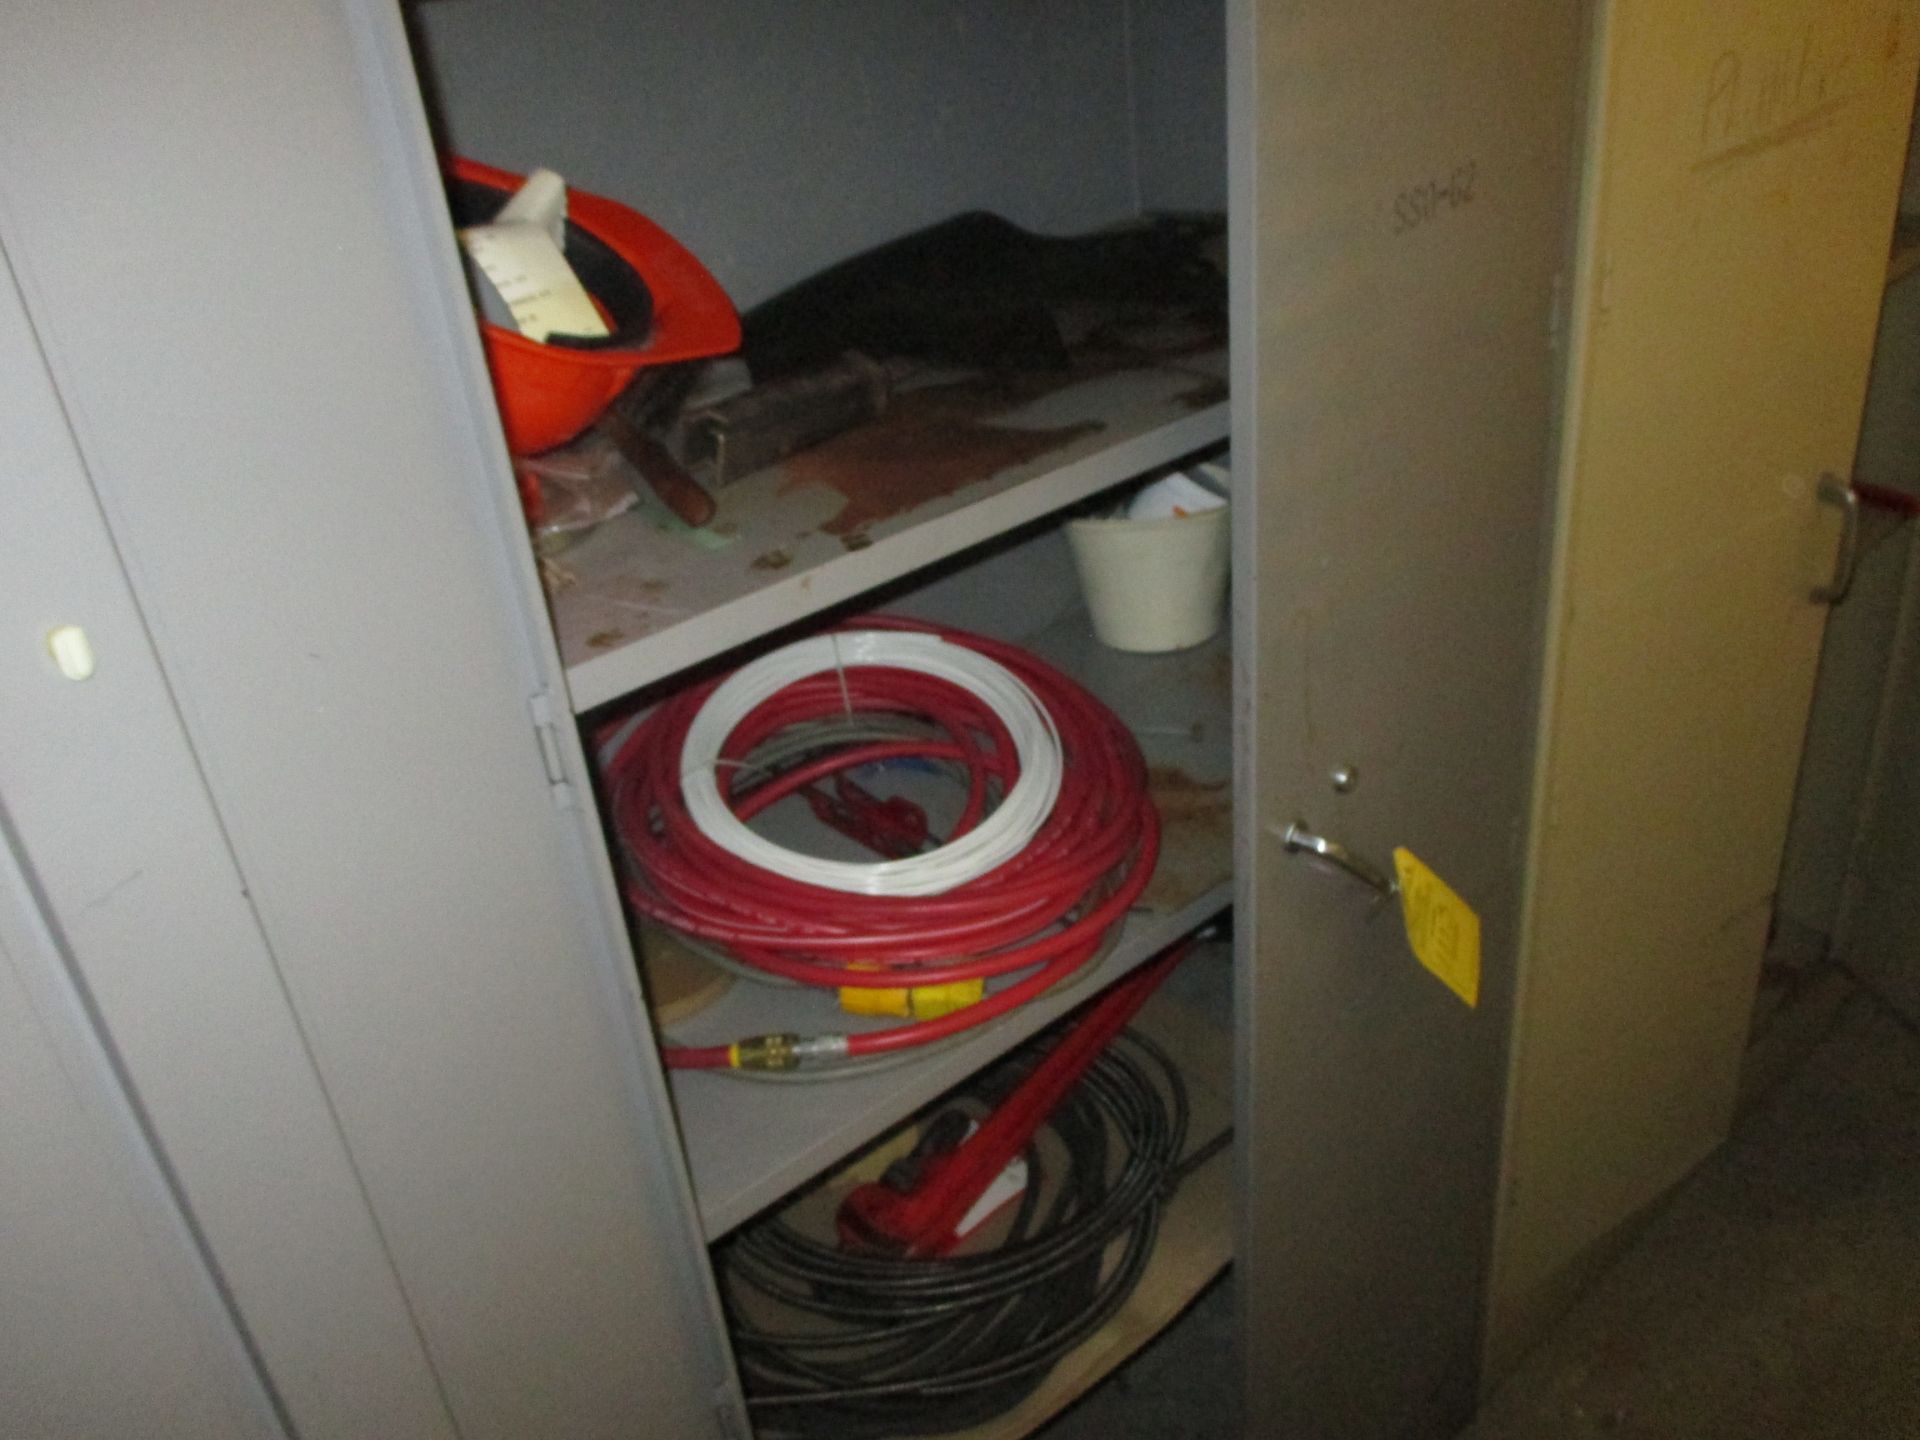 STEEL CABINET & CONTENTS INCLUDING HOSES & MISC. 1320 Production Road, Fort Wayne, IN 46808 - Image 3 of 3